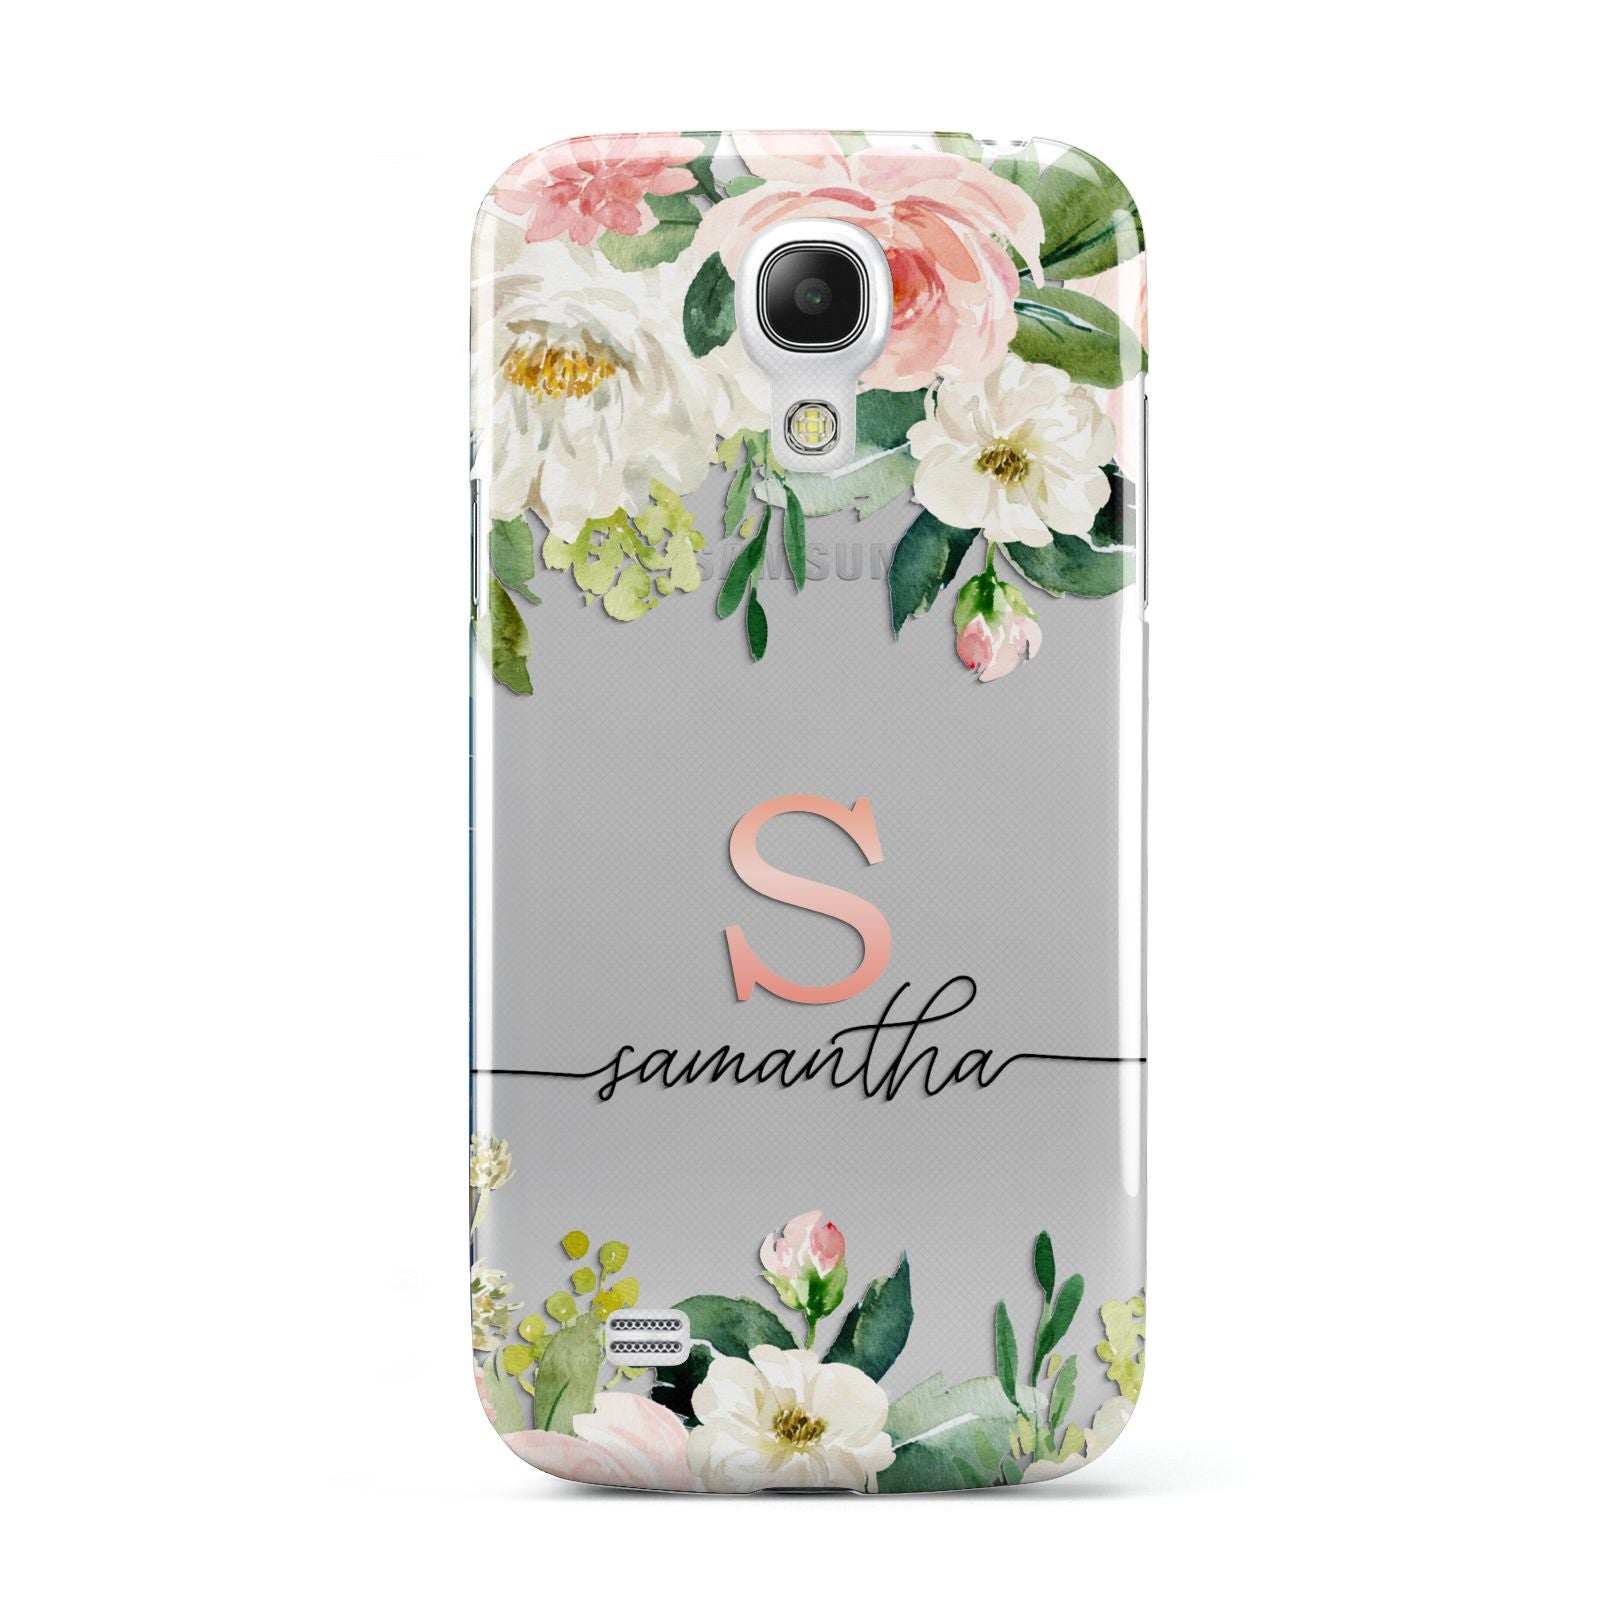 Monogrammed Floral Roses Samsung Galaxy S4 Mini Case